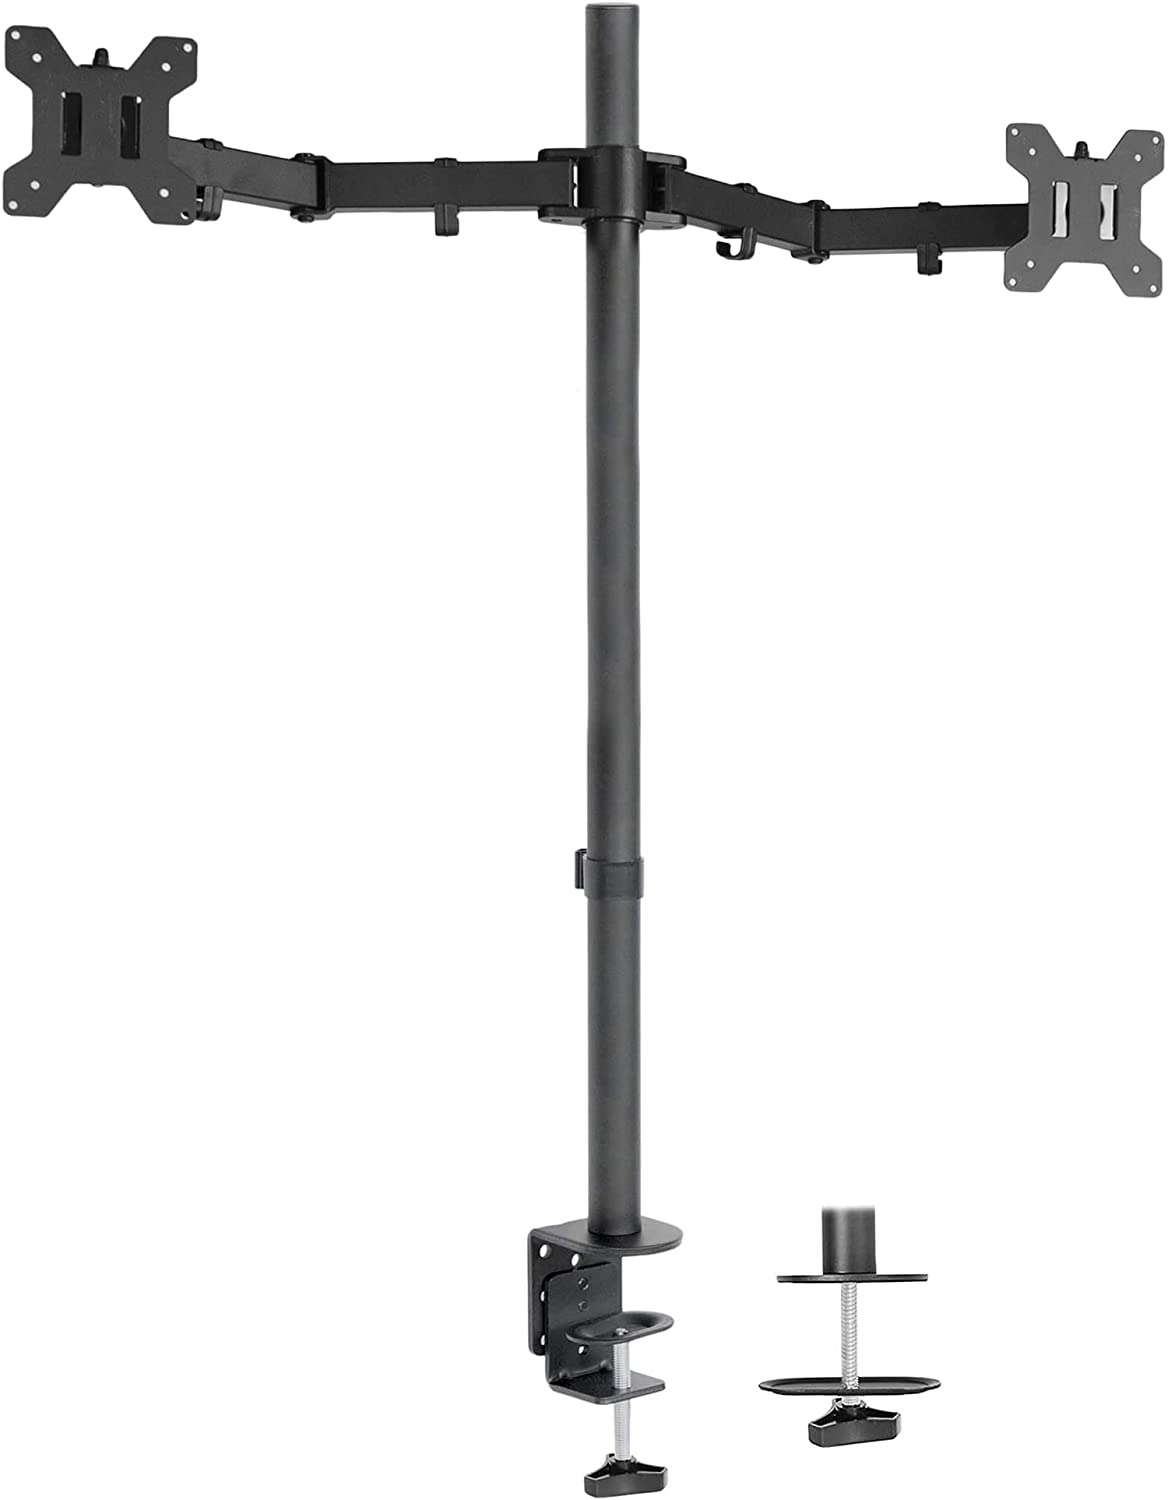 VIVO Dual Monitor Stand Up Desk Mount Extra Tall 39 inch Pole Fully Adjustable S